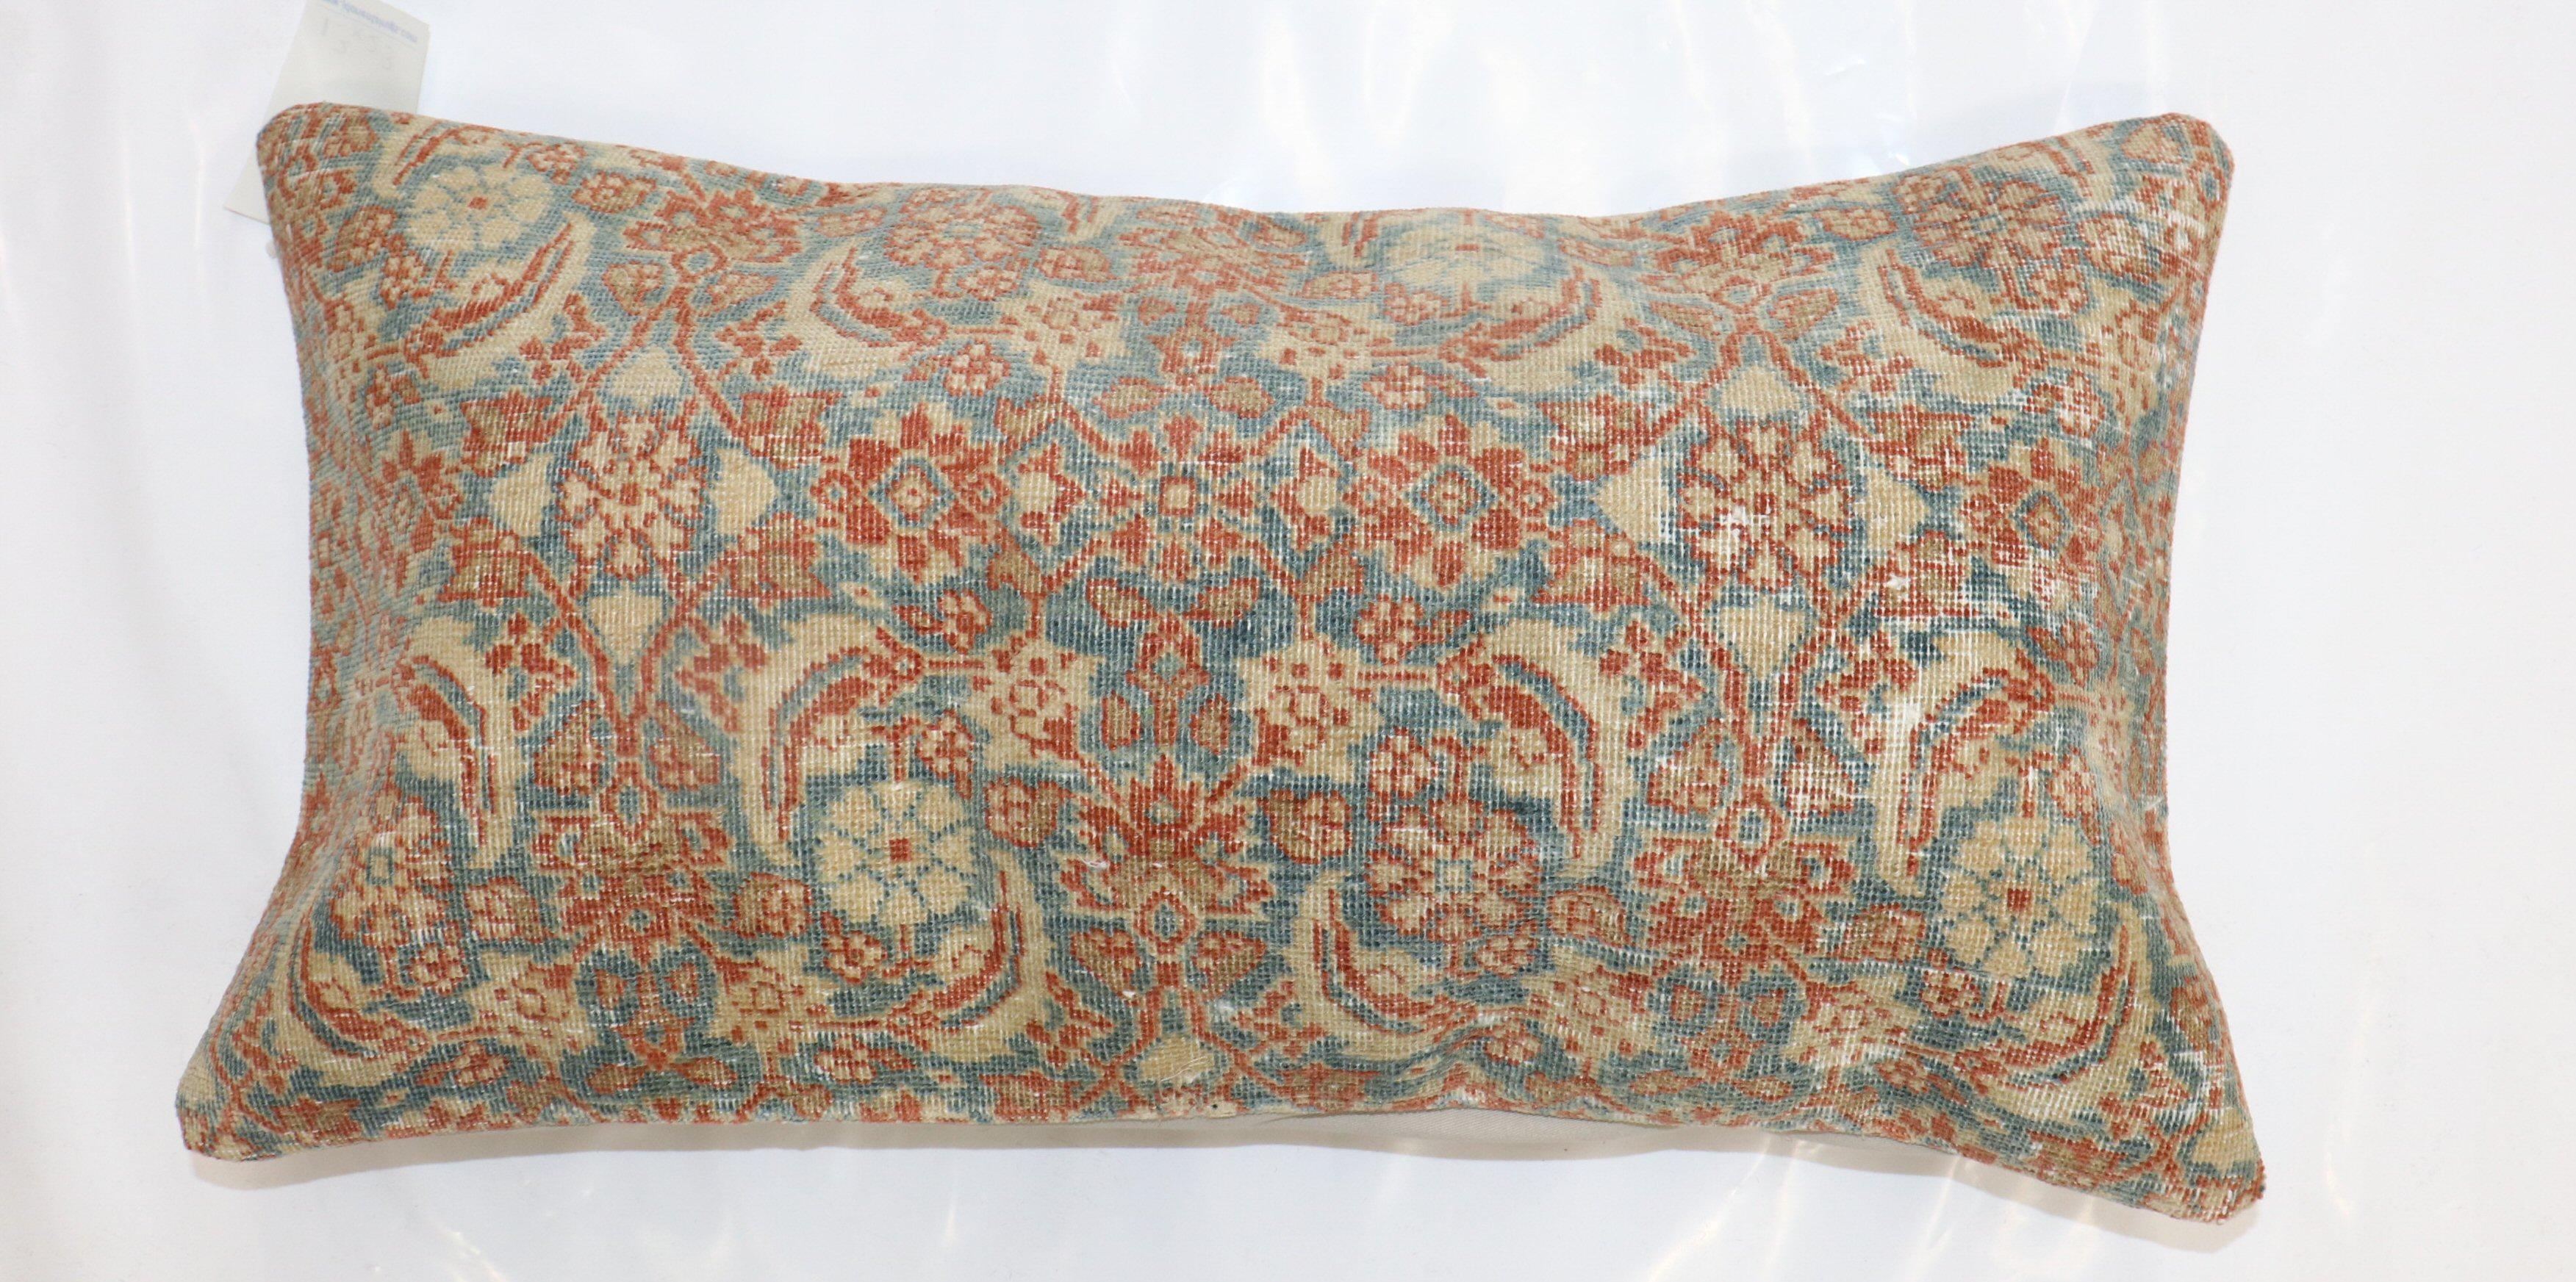 Pillow made from a finely woven persian senneh rug.

Measures: 14'' x 26''.